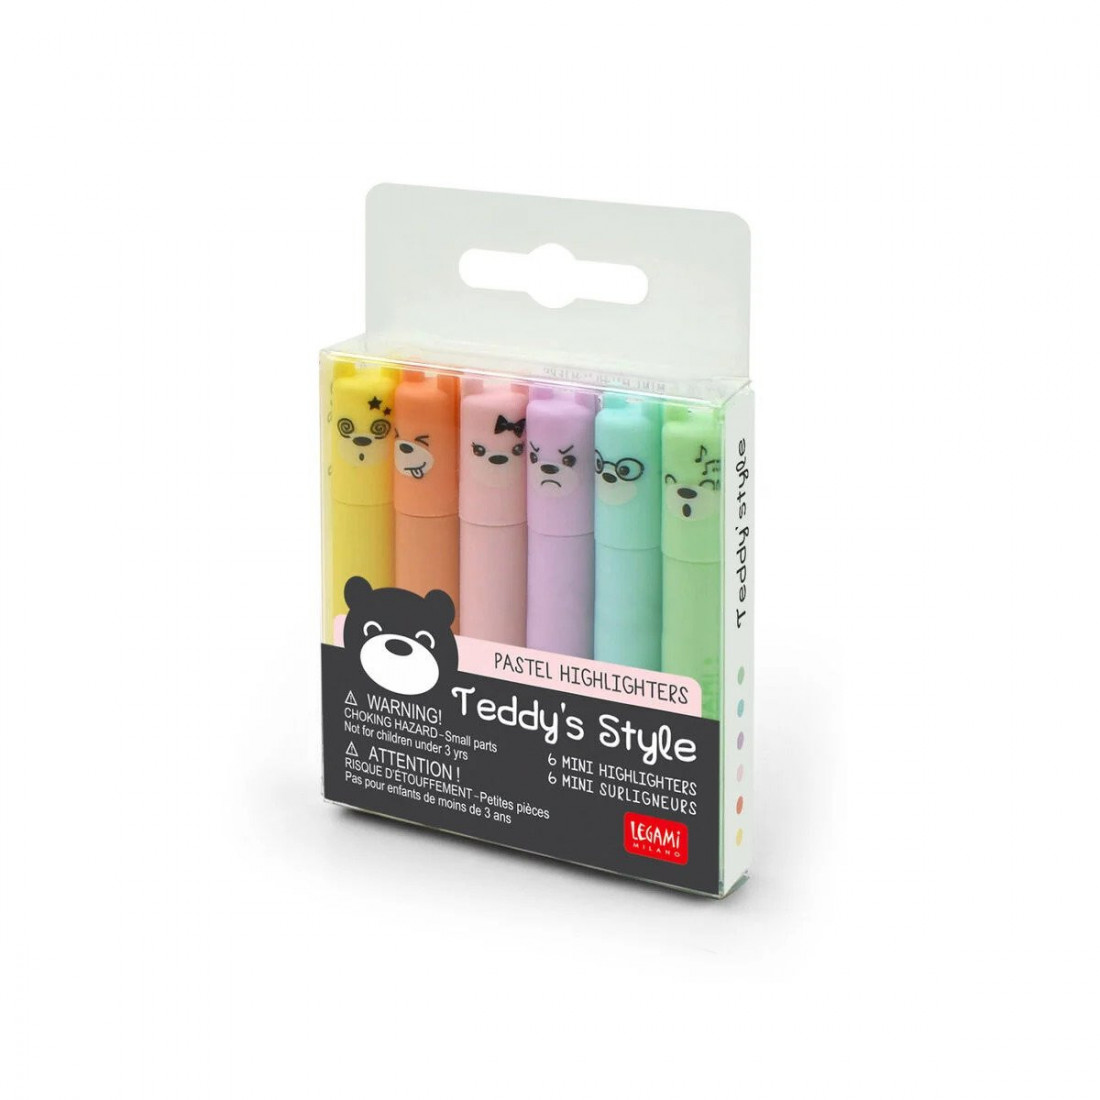 Teddys Style Pastel Highlighters MH0004 Legami